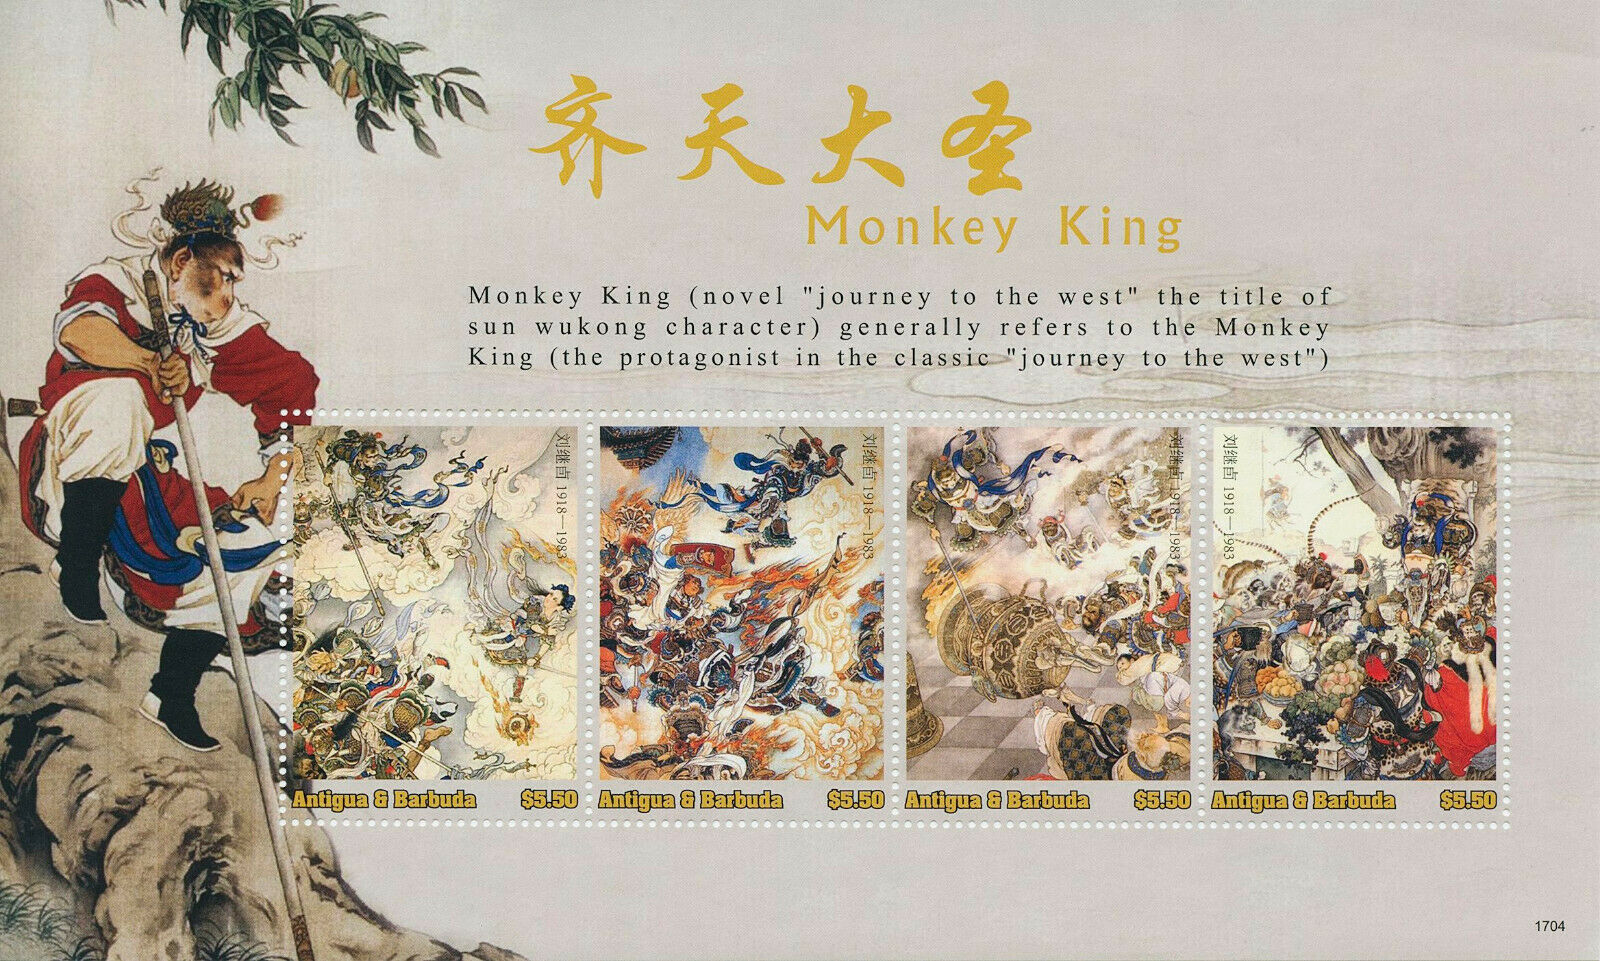 Antigua & Barbuda 2017 MNH Literature Stamps Monkey King Journey to West 4v M/S